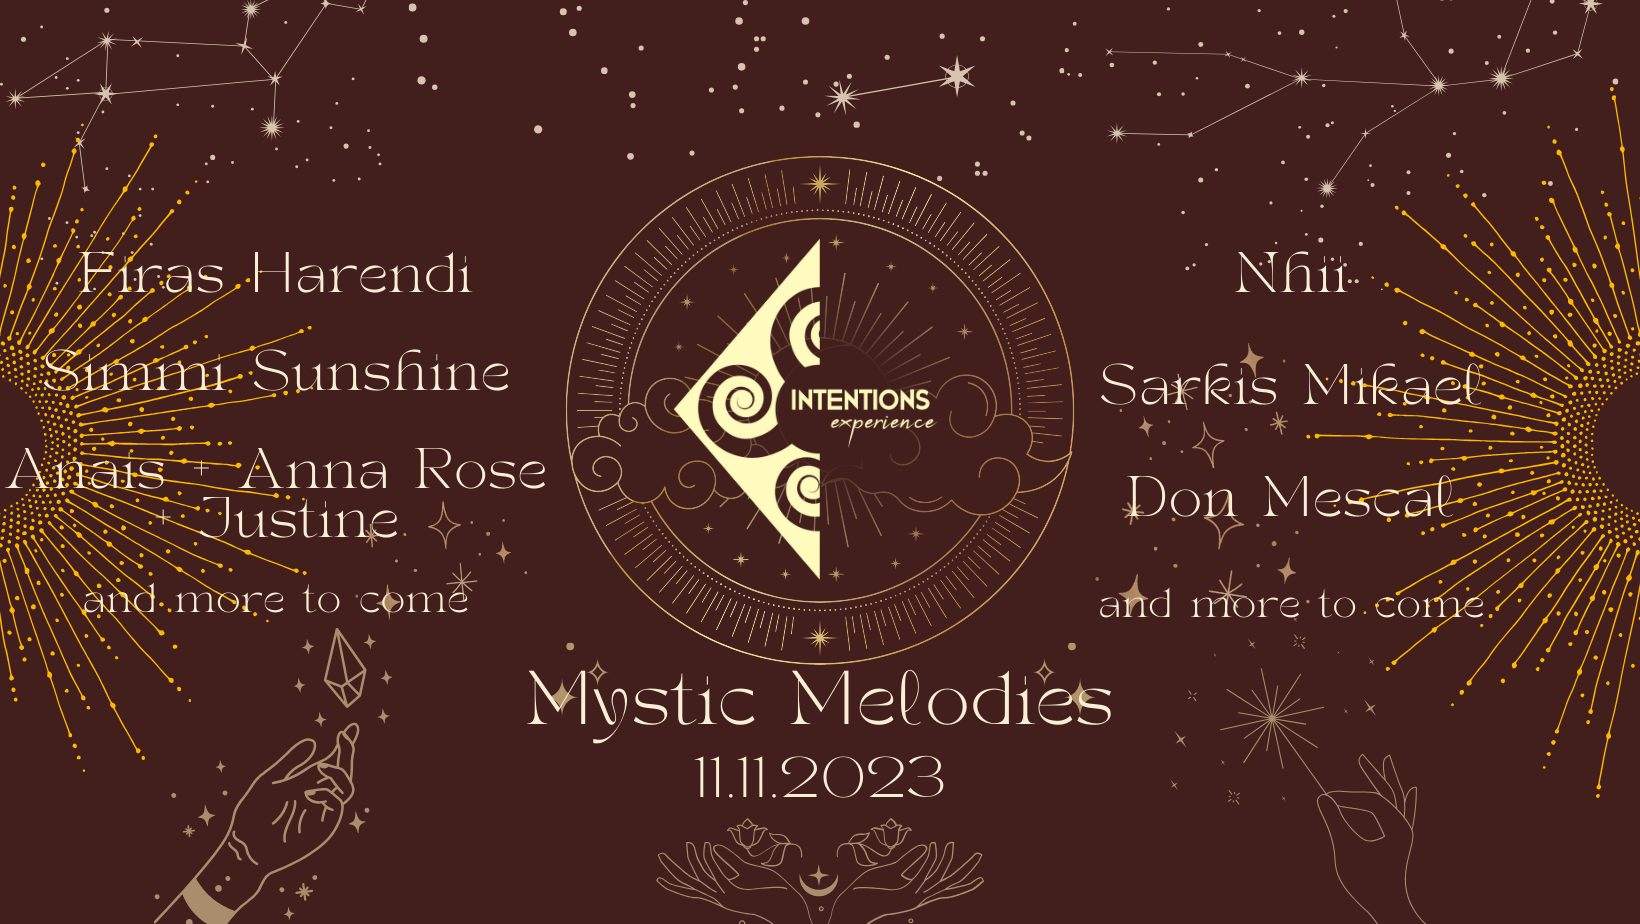 Intentions Experience: Mystic Melodies w/Nhii, Sarkis Mikael, Don Mescal - Página frontal